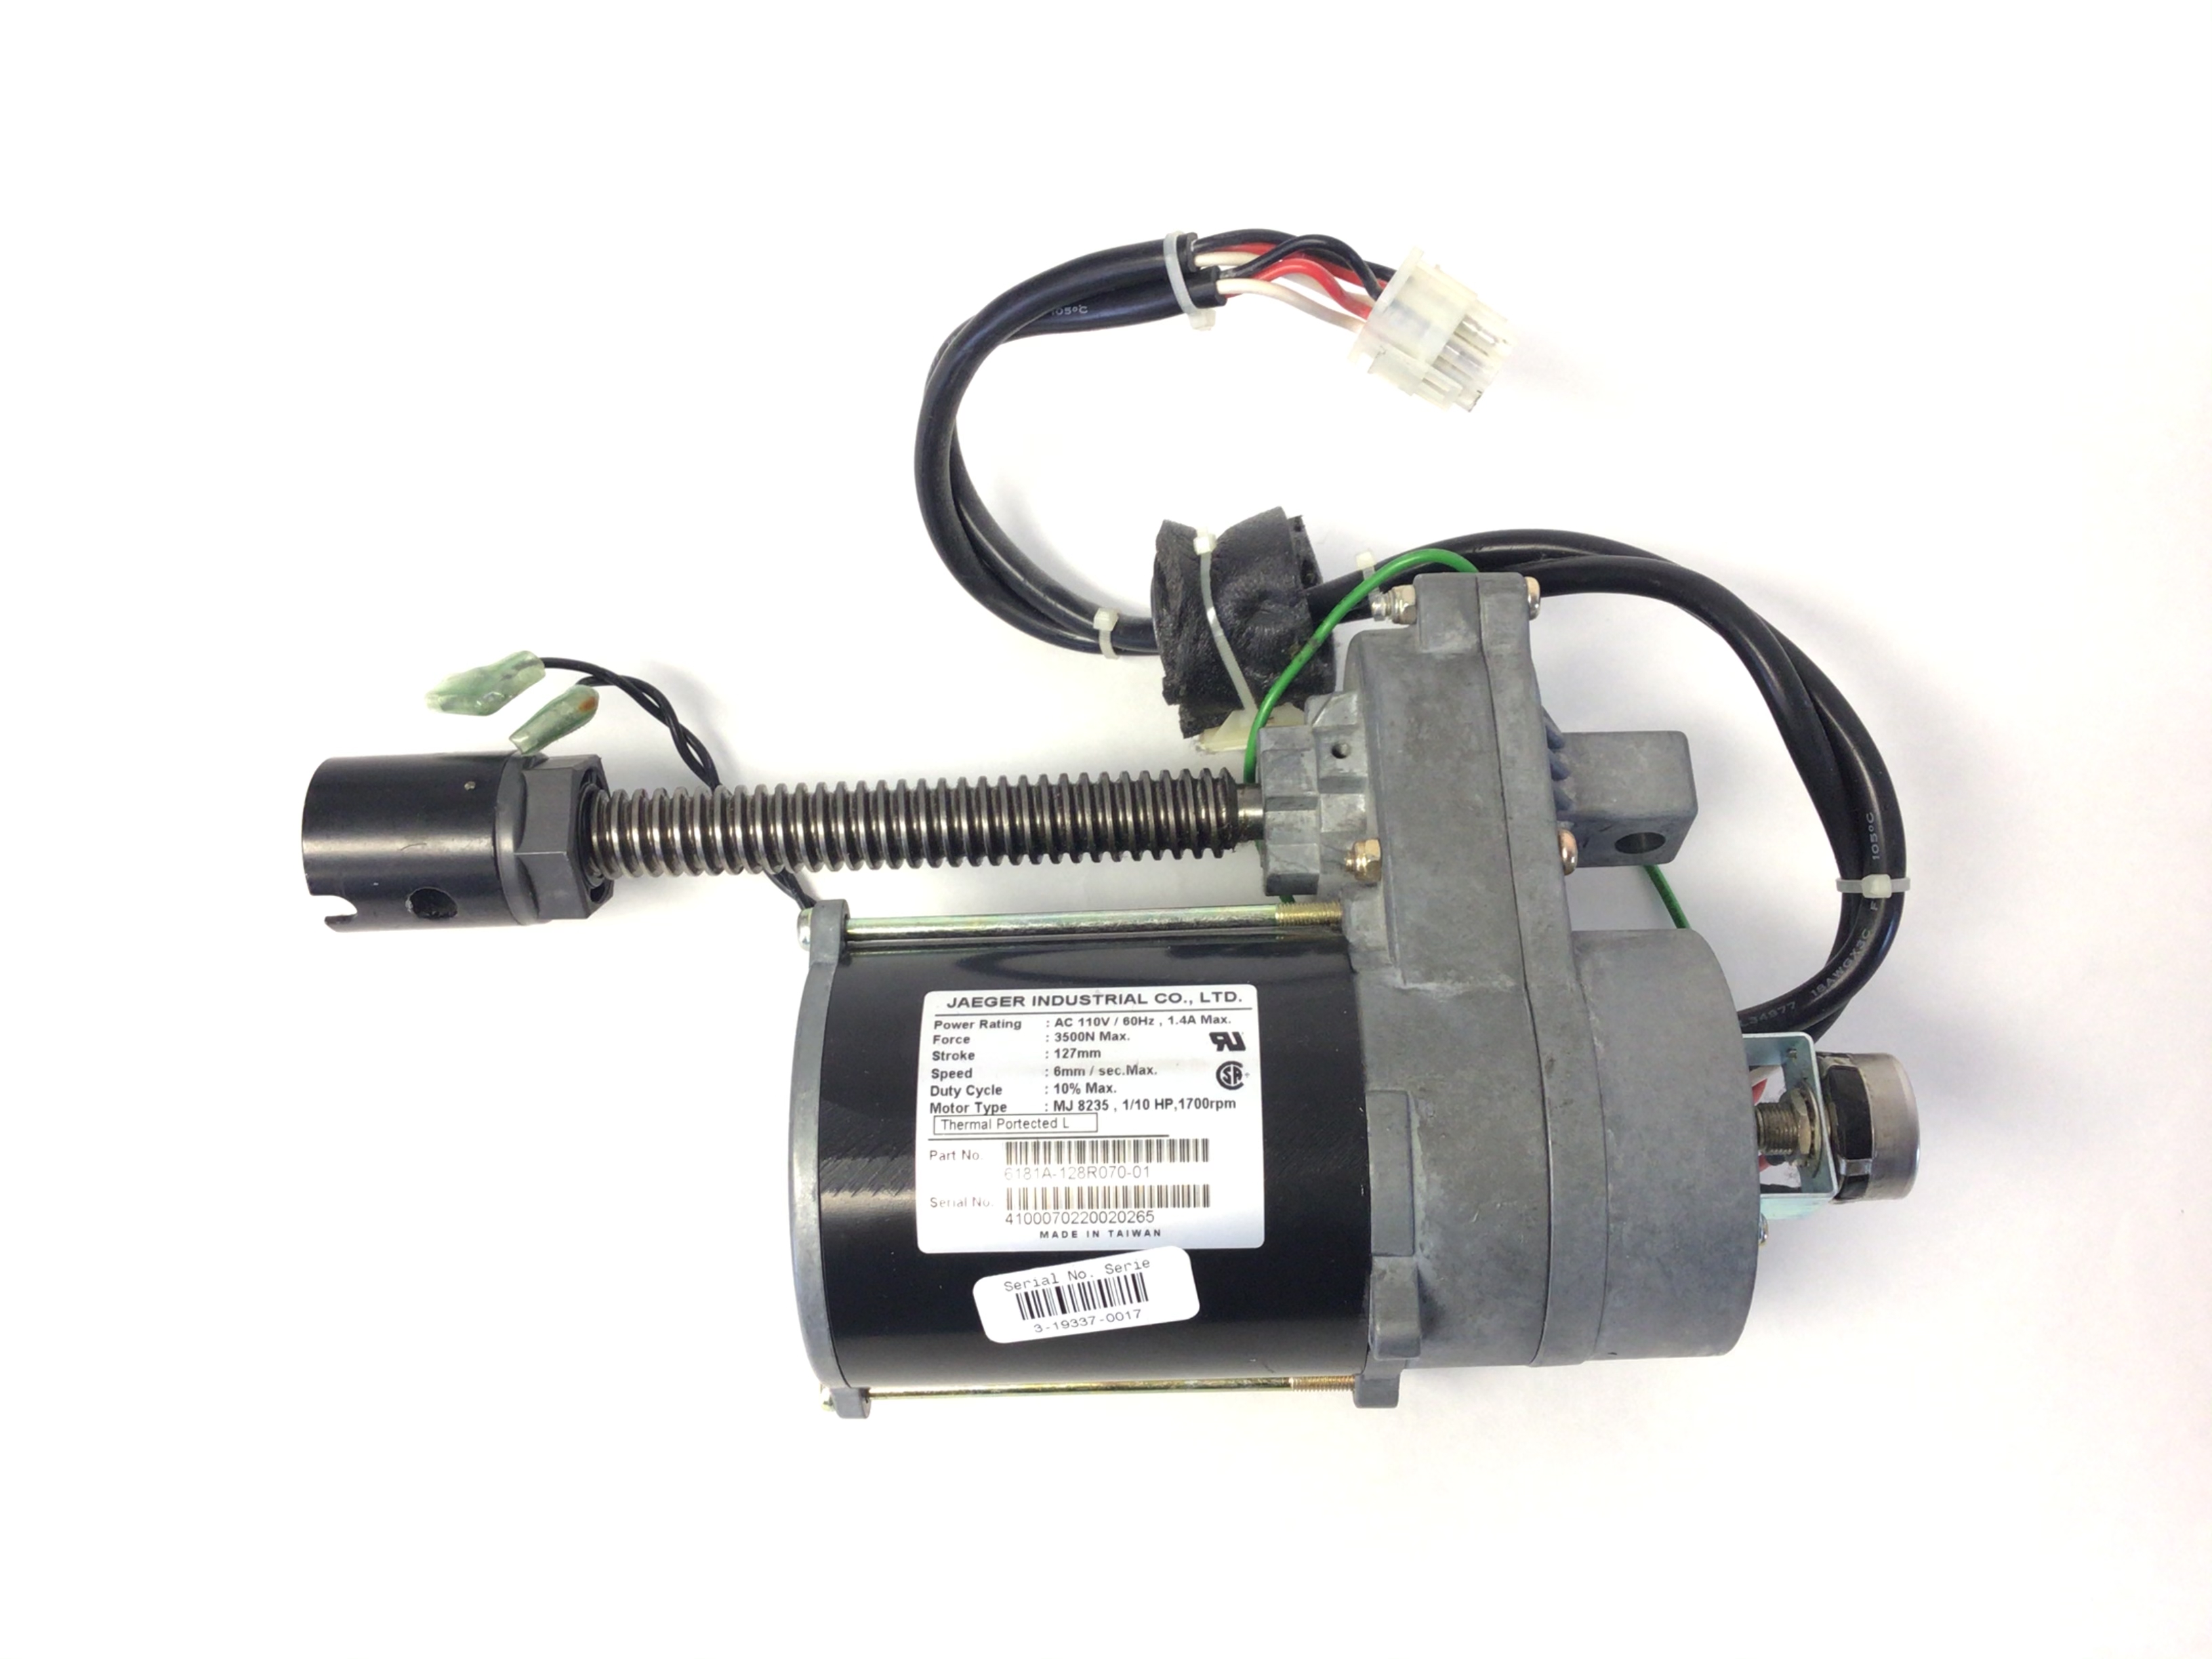 Jaeger Incline Lift Elevation Motor Actuator 6181A-128R070-01(Used)